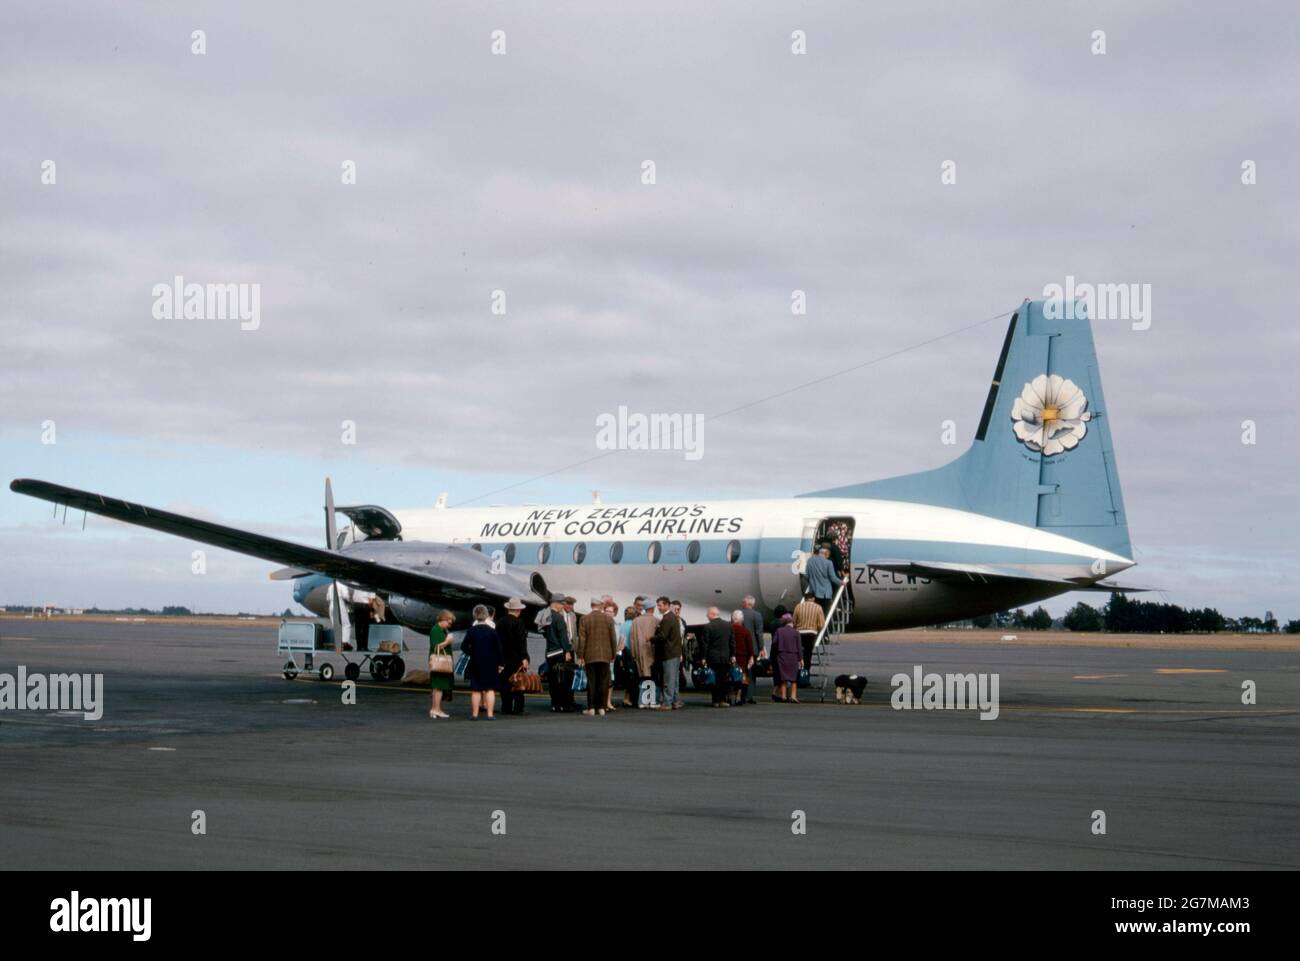 An airliner of New Zealand’s Mount Cook Airlines with passengers boarding on the tarmac at Christchurch Airport in 1969. Mount Cook Airline was a regional airline, founded in 1920, based in Christchurch, New Zealand. Formerly part of the Mount Cook Group and latterly a subsidiary of Air New Zealand, in 2019 the brand name was retired with all services flying under the Air New Zealand banner. The aircraft is a Hawker Siddeley HS 748, a medium-sized turboprop airliner. On the tail is an image of the Mount Cook lily, the largest buttercup in the world – a vintage 1960s photograph. Stock Photo